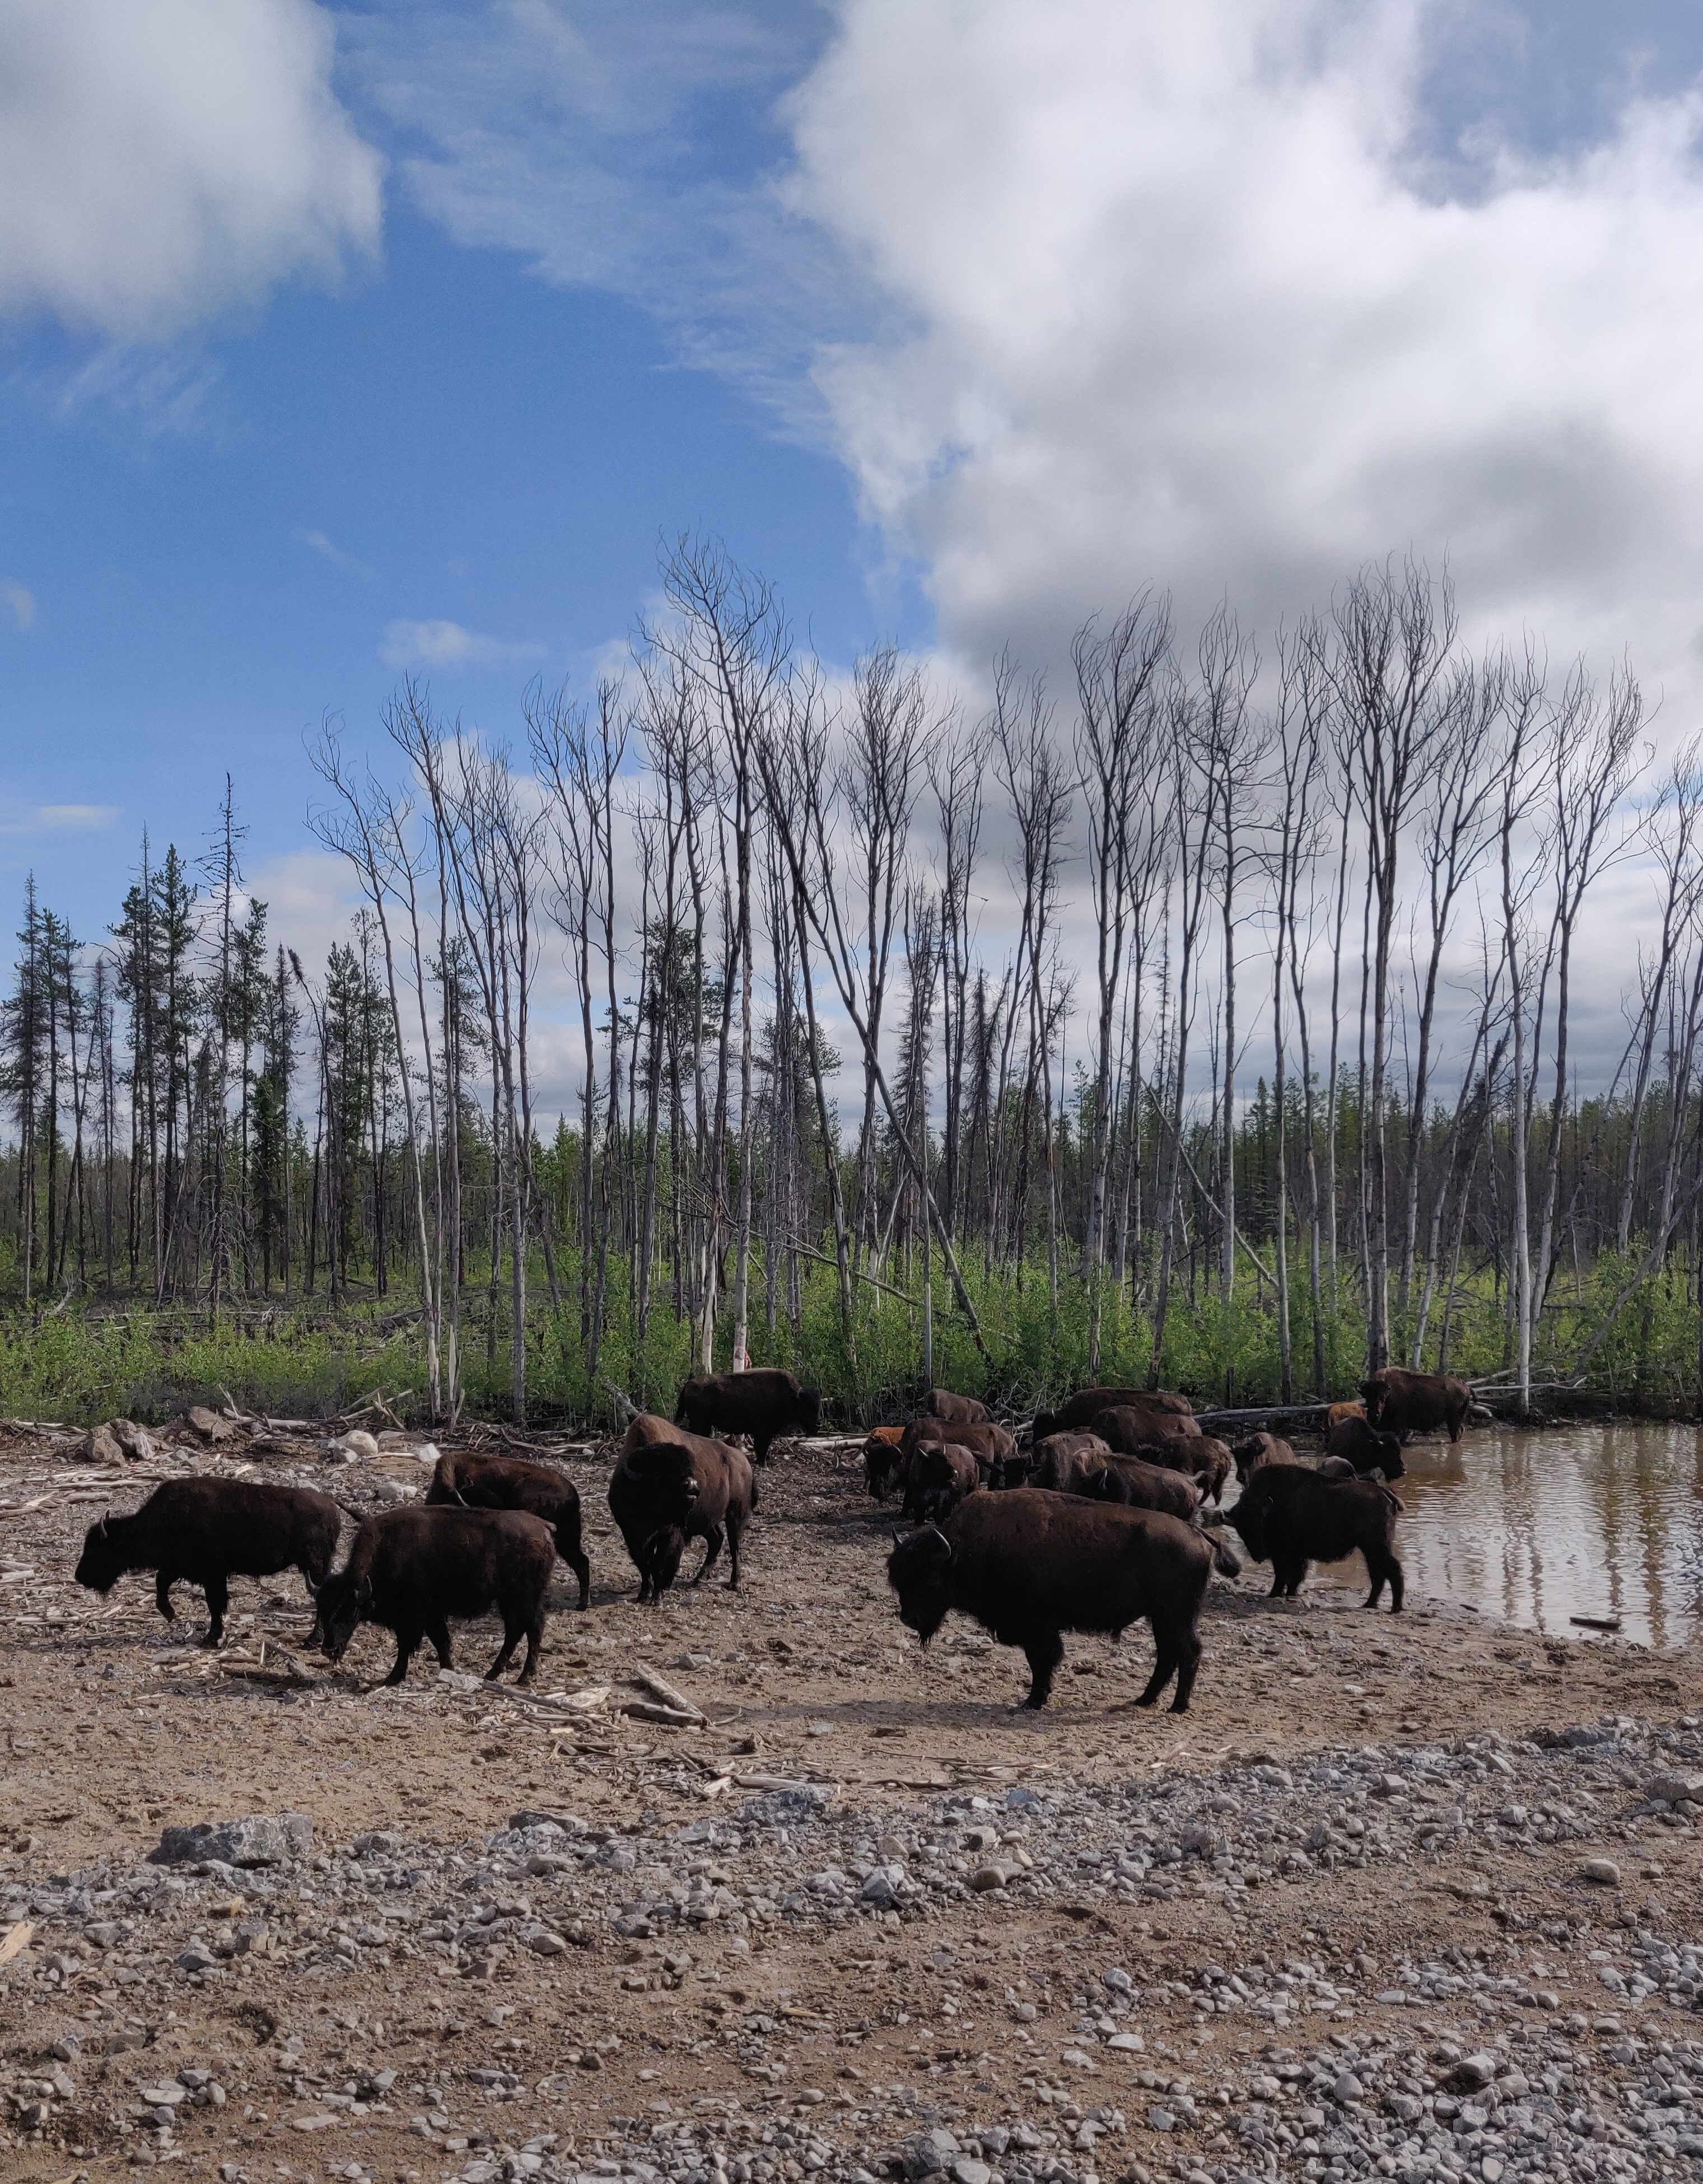 Bison on the side of the road. Photo Credit: Laura Meinert.